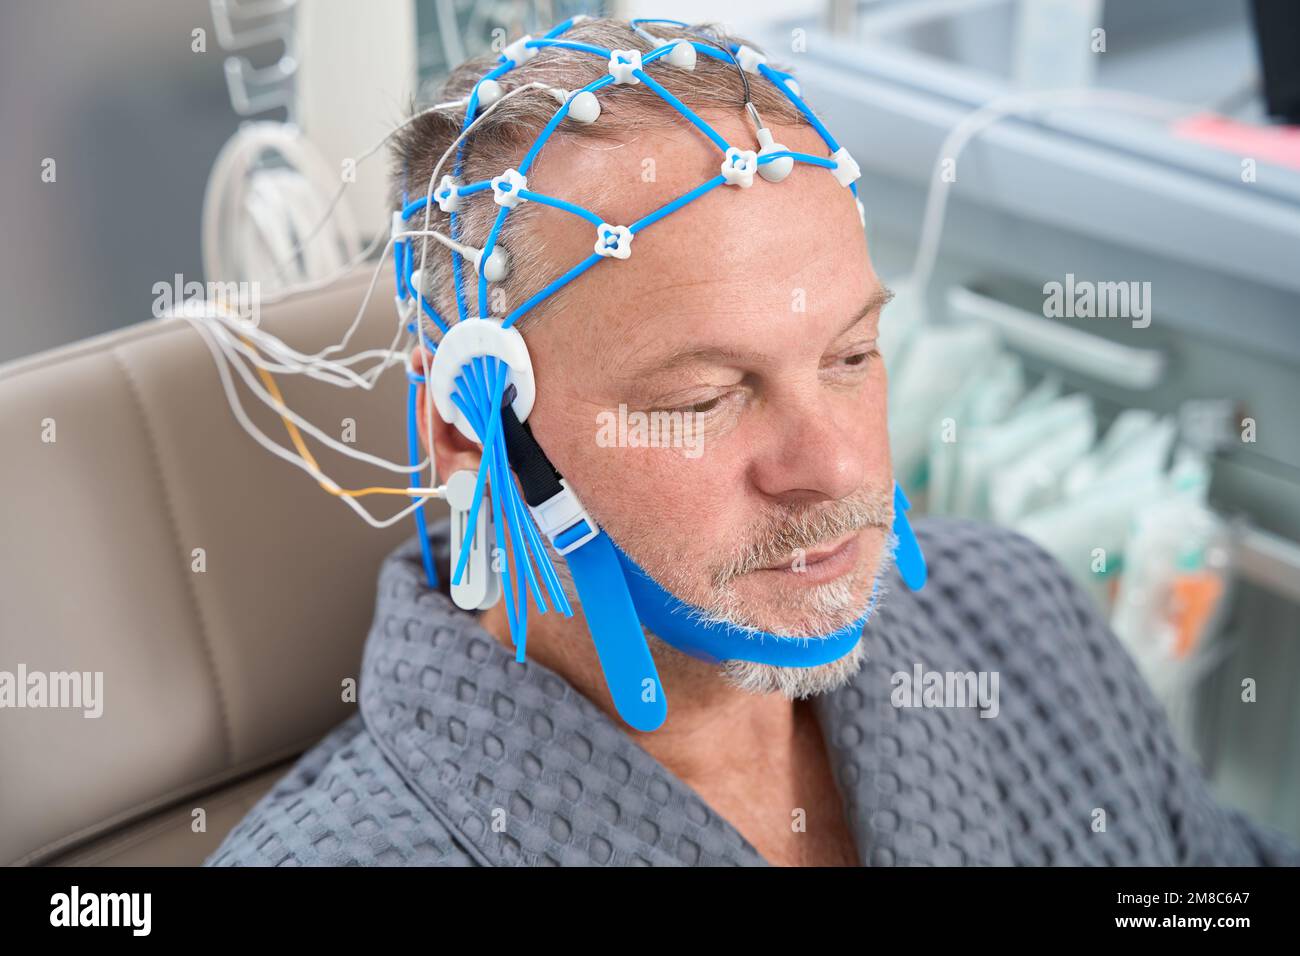 Man has cap of electrodes for encephalography on his head Stock Photo